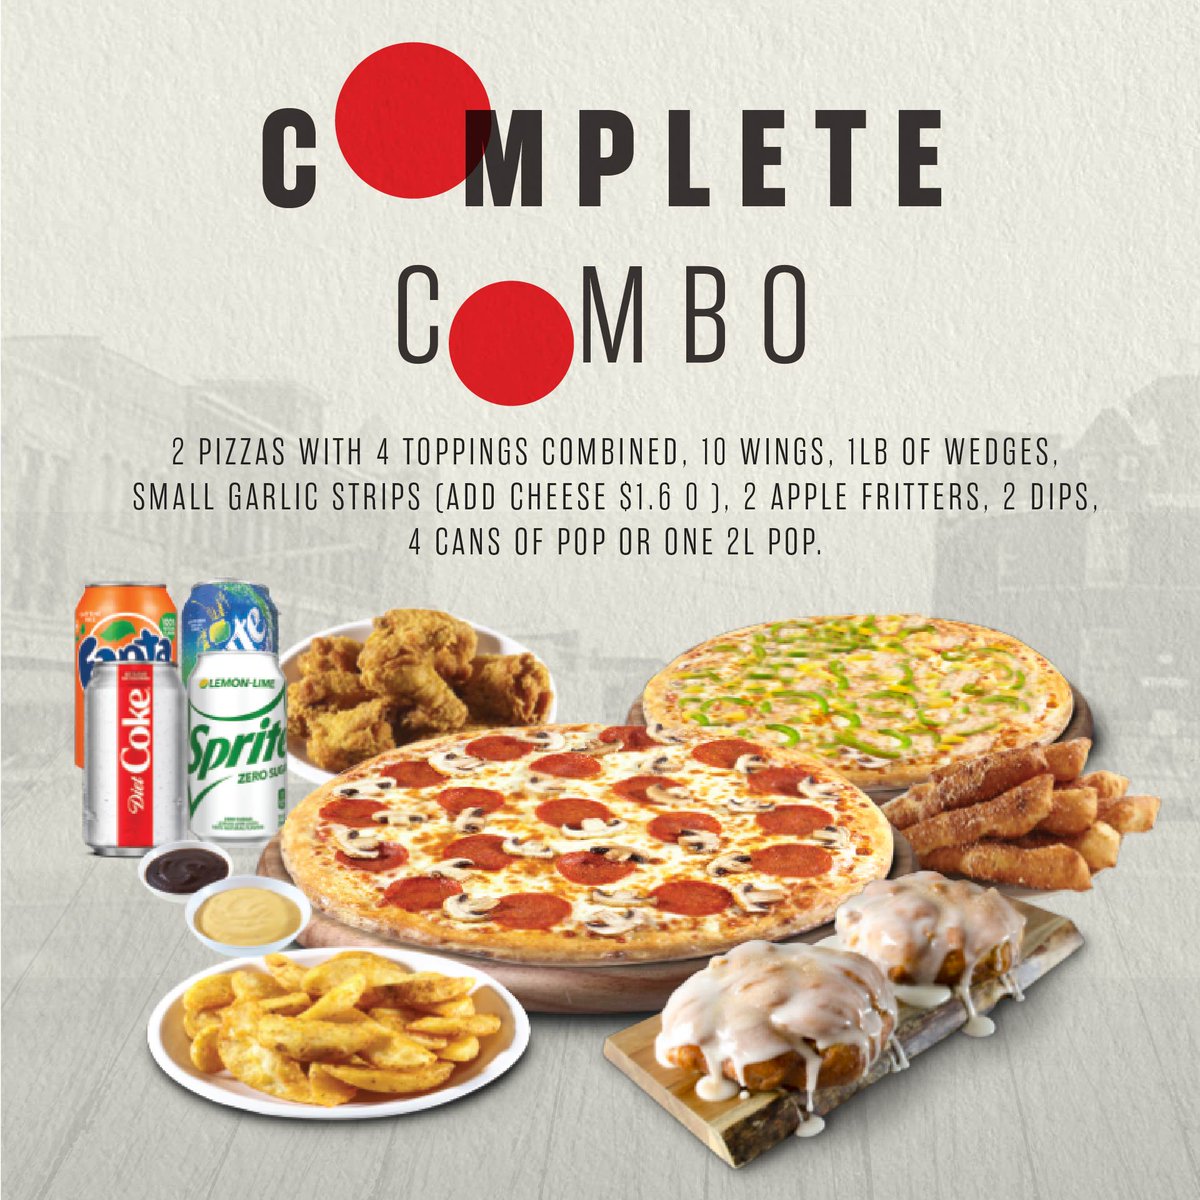 Feed the whole family tonight with the Complete C🔴mb🔴!  
.
.
.
#NewOrleansPizza #NOP #MyNOP #CompleteCombo #PizzaDelivery #PickUp